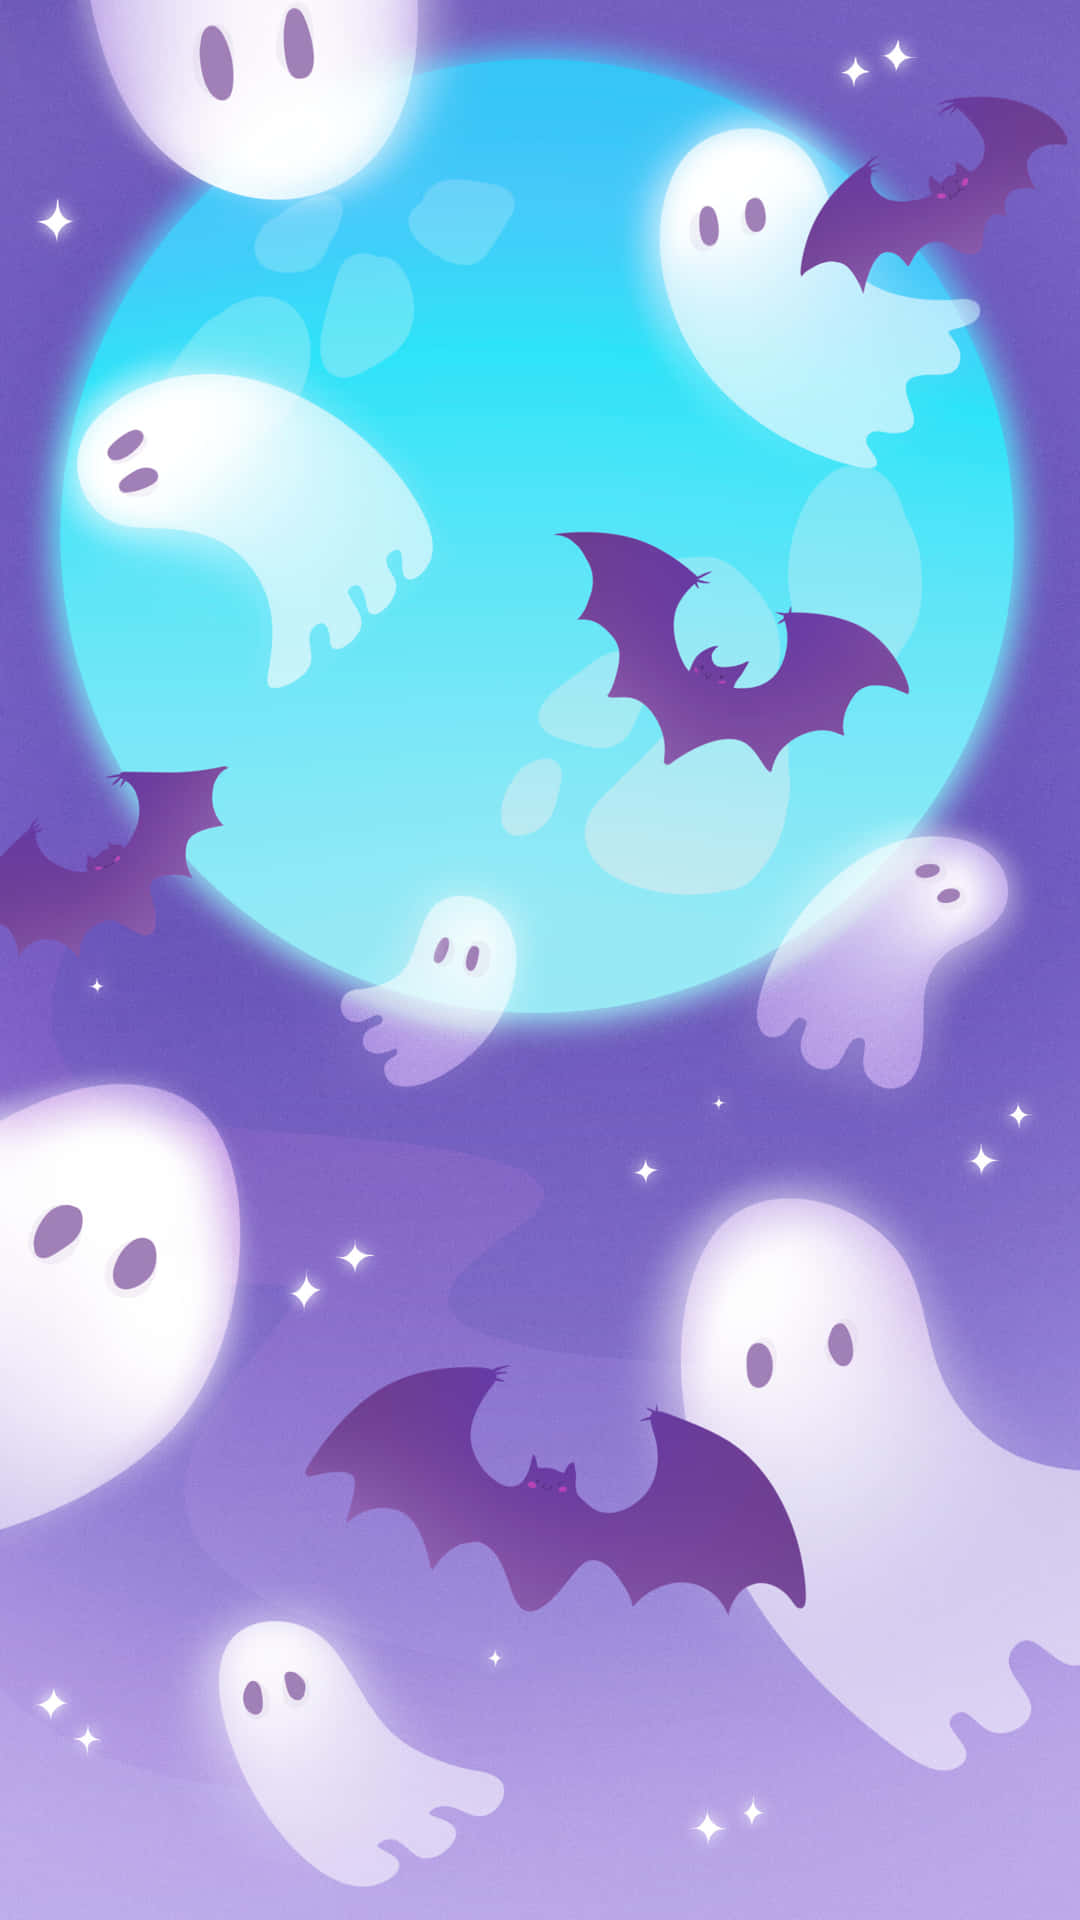 Get ready for Halloween with a new phone background!